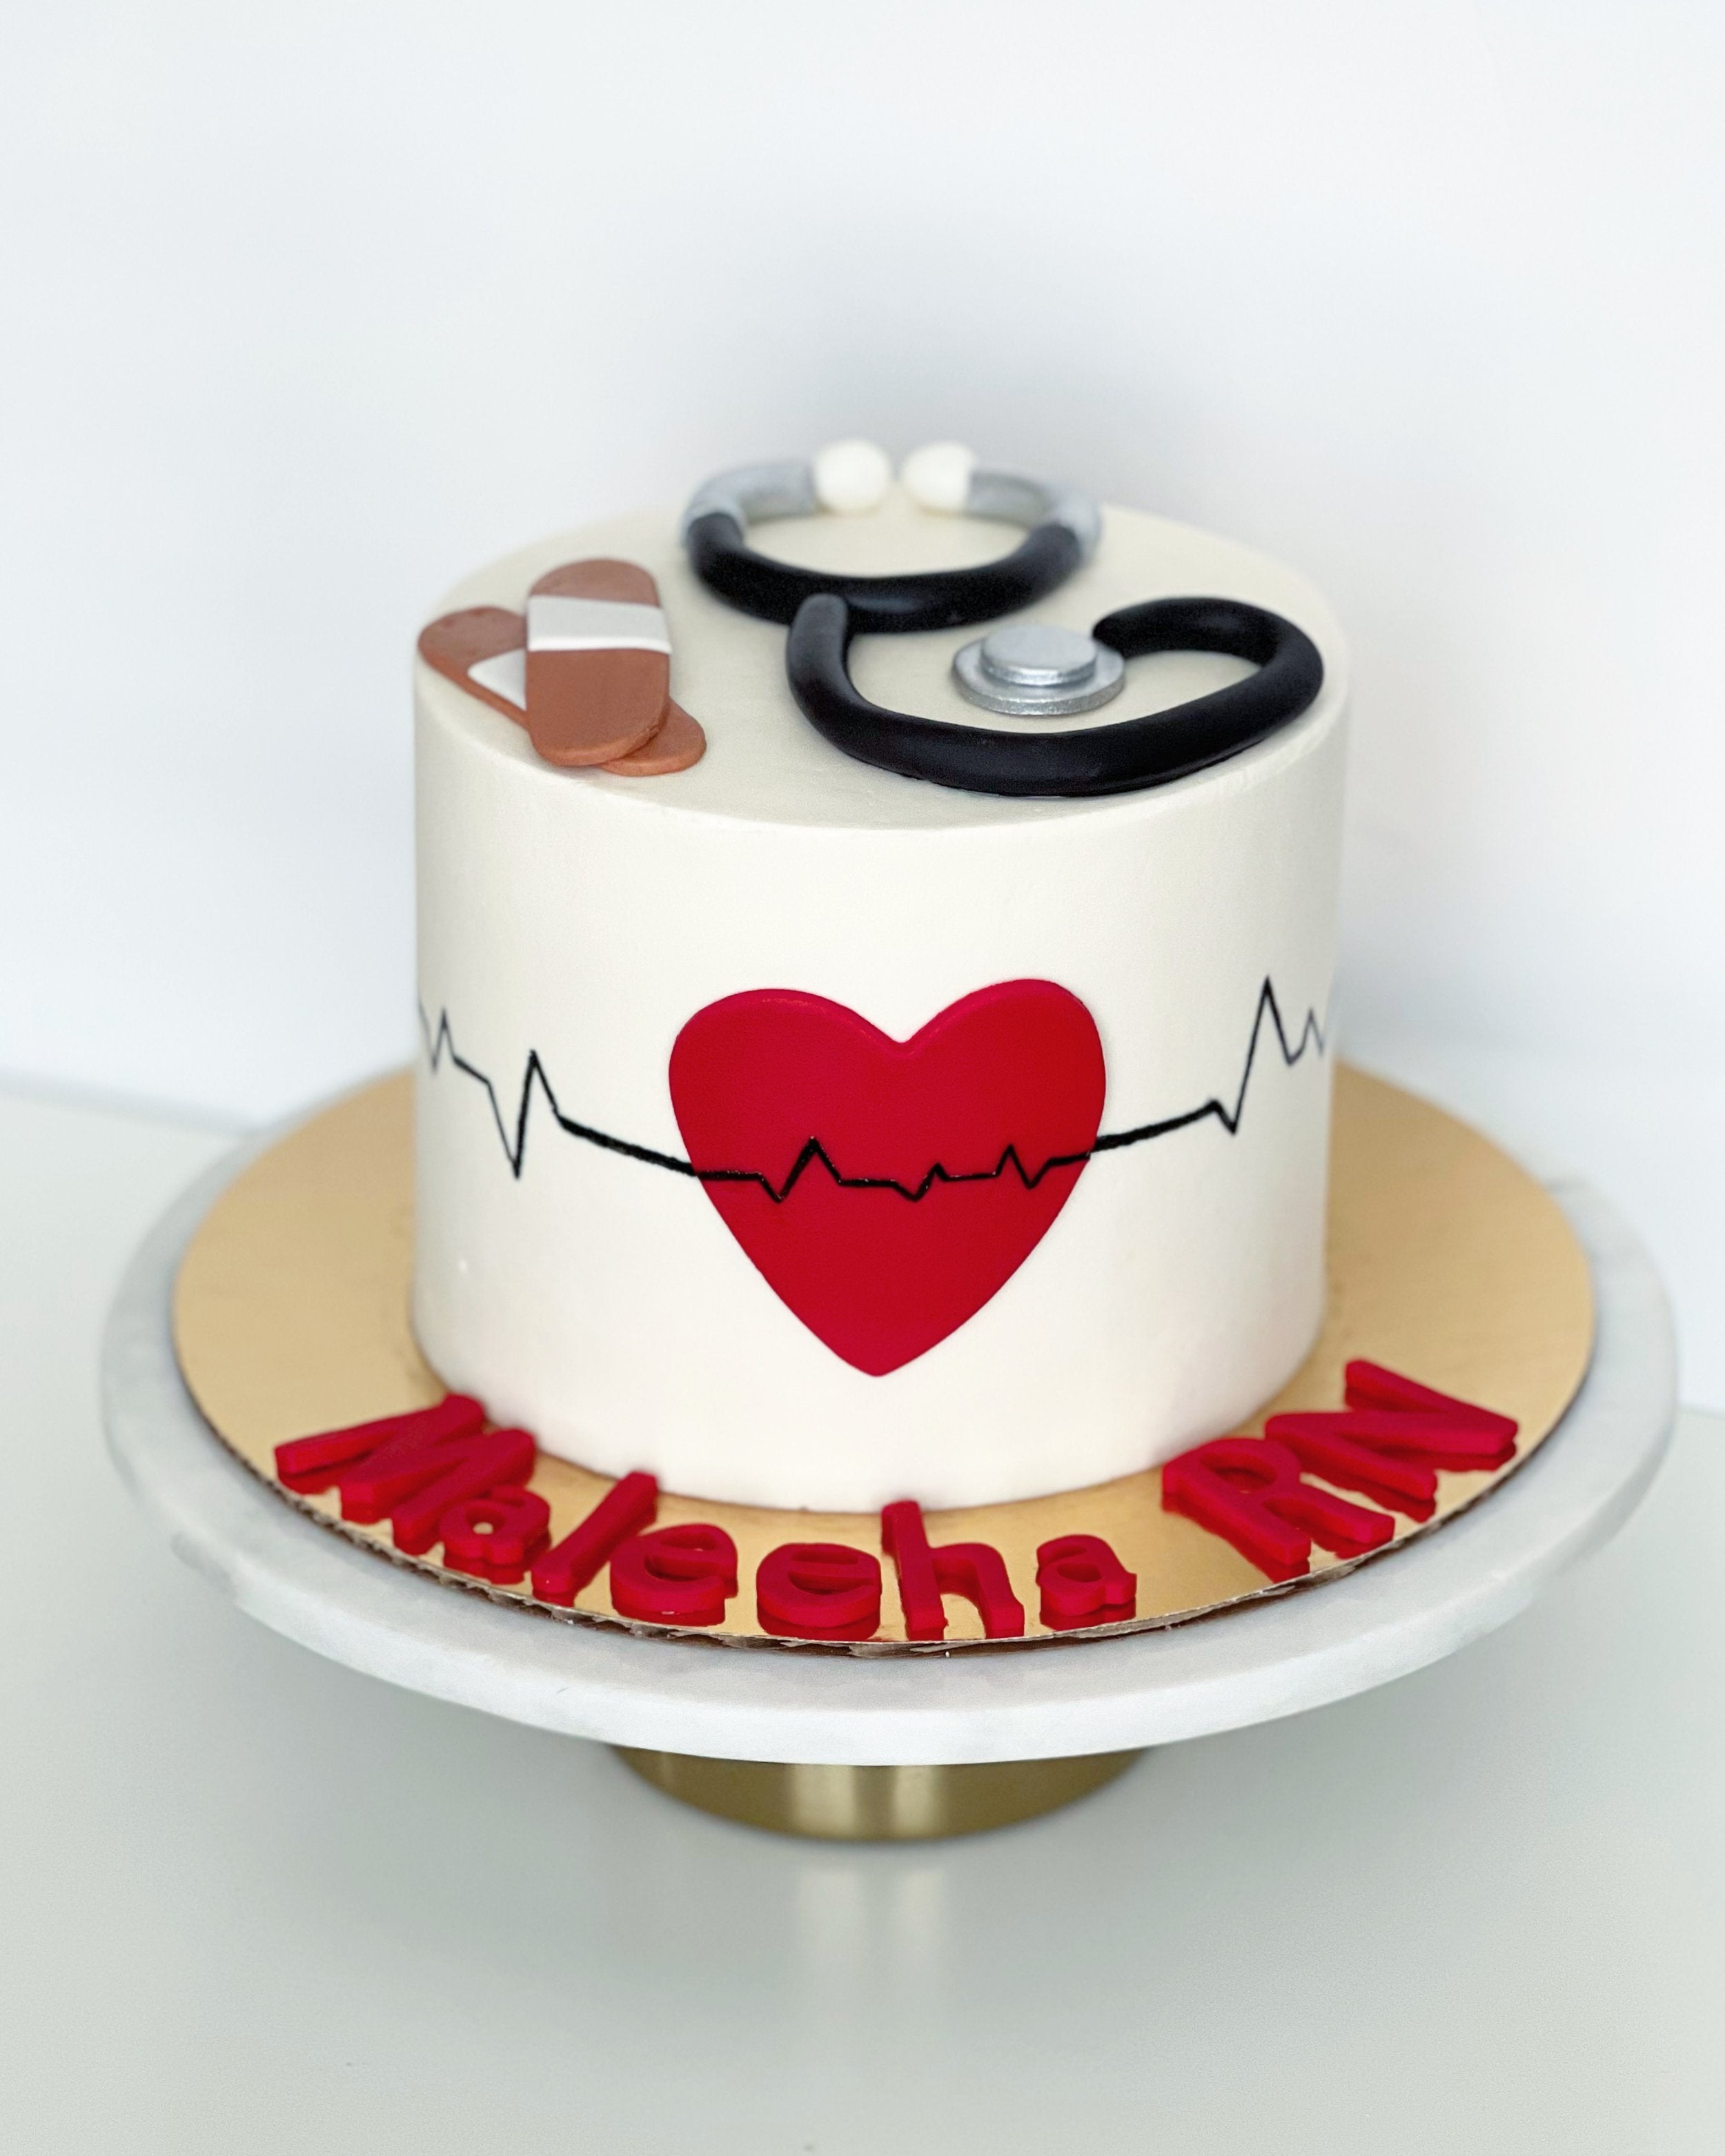 The Great Cake Experience: Stethoscope